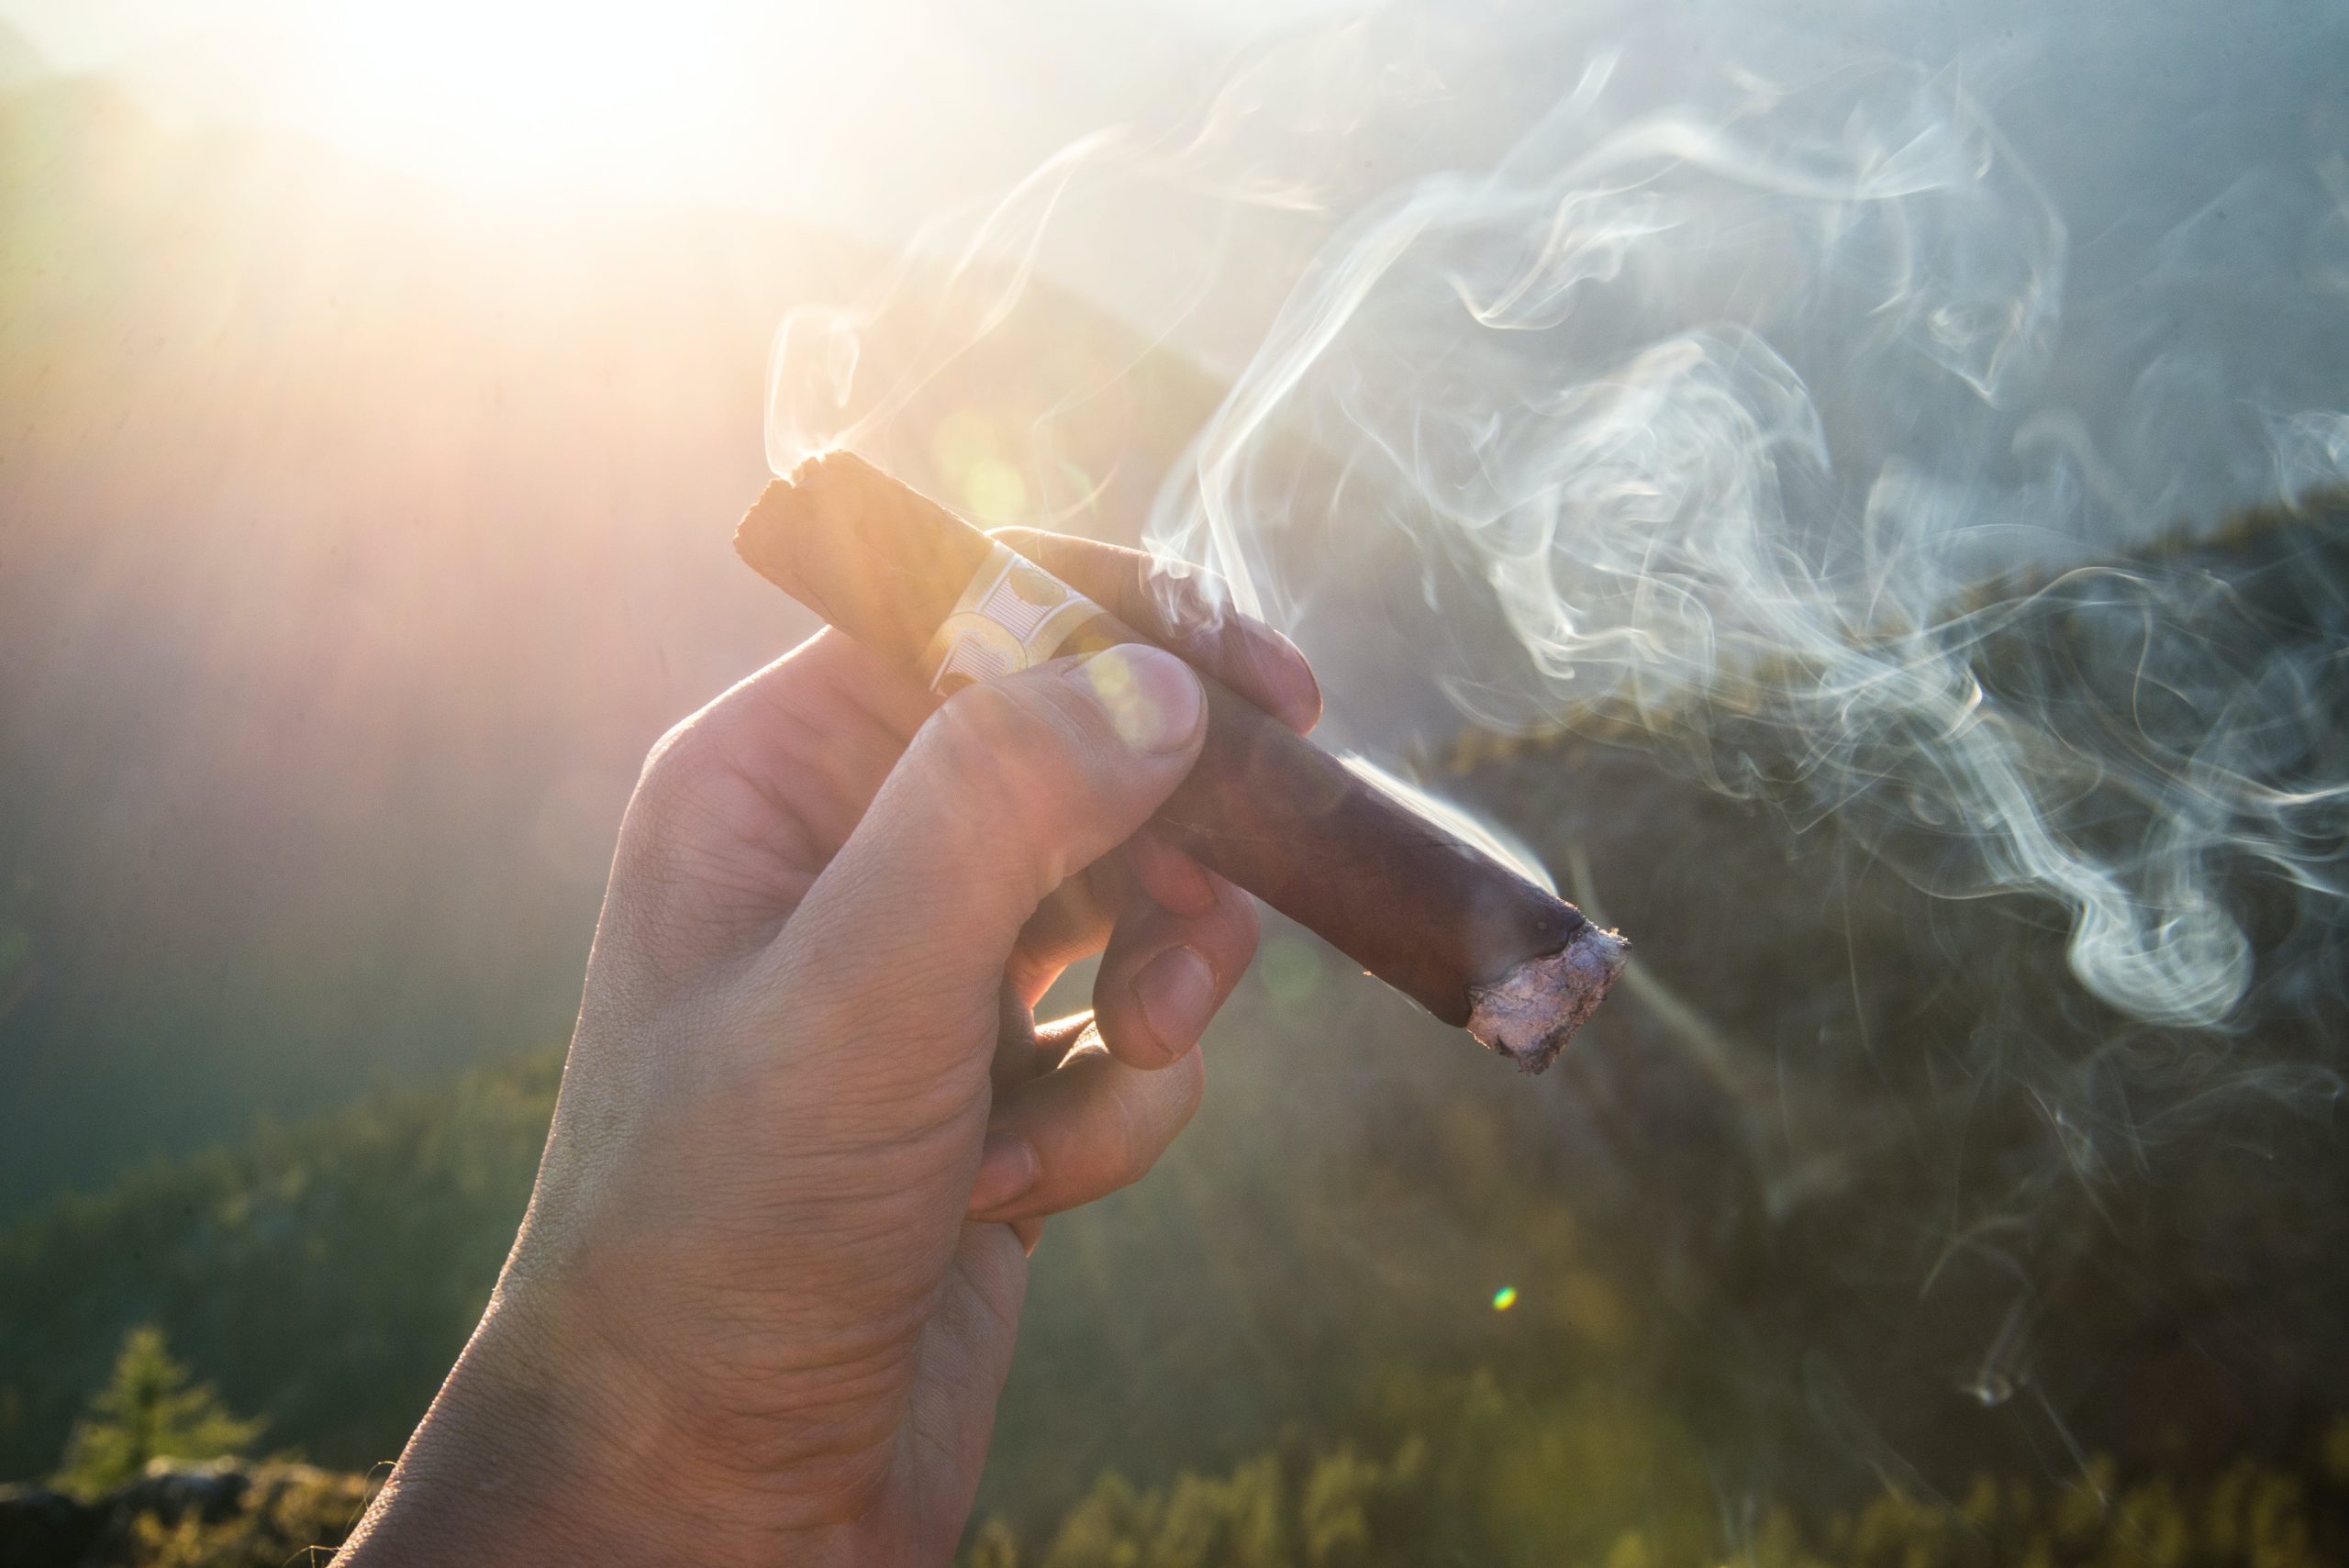 Cigar held with smoke as sun sets, beautiful nature background